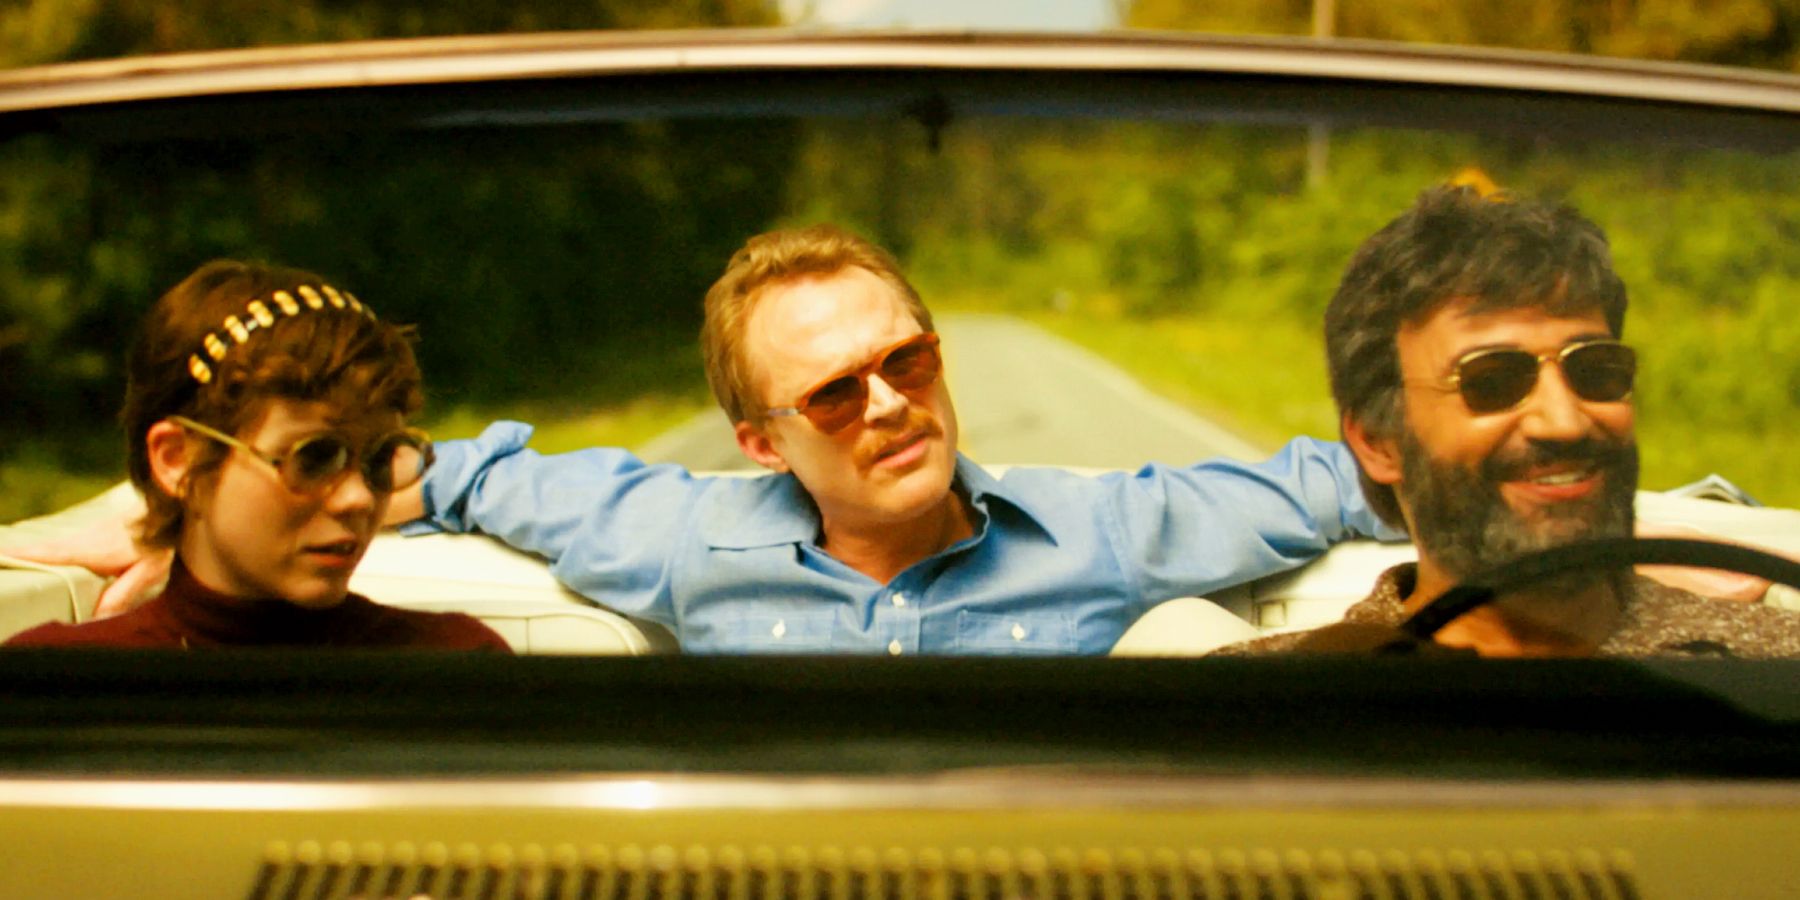 Sophia Lillis as Beth with Paul Bettany as Frank and Peter Macdissi as Wally on the road in Uncle Frank